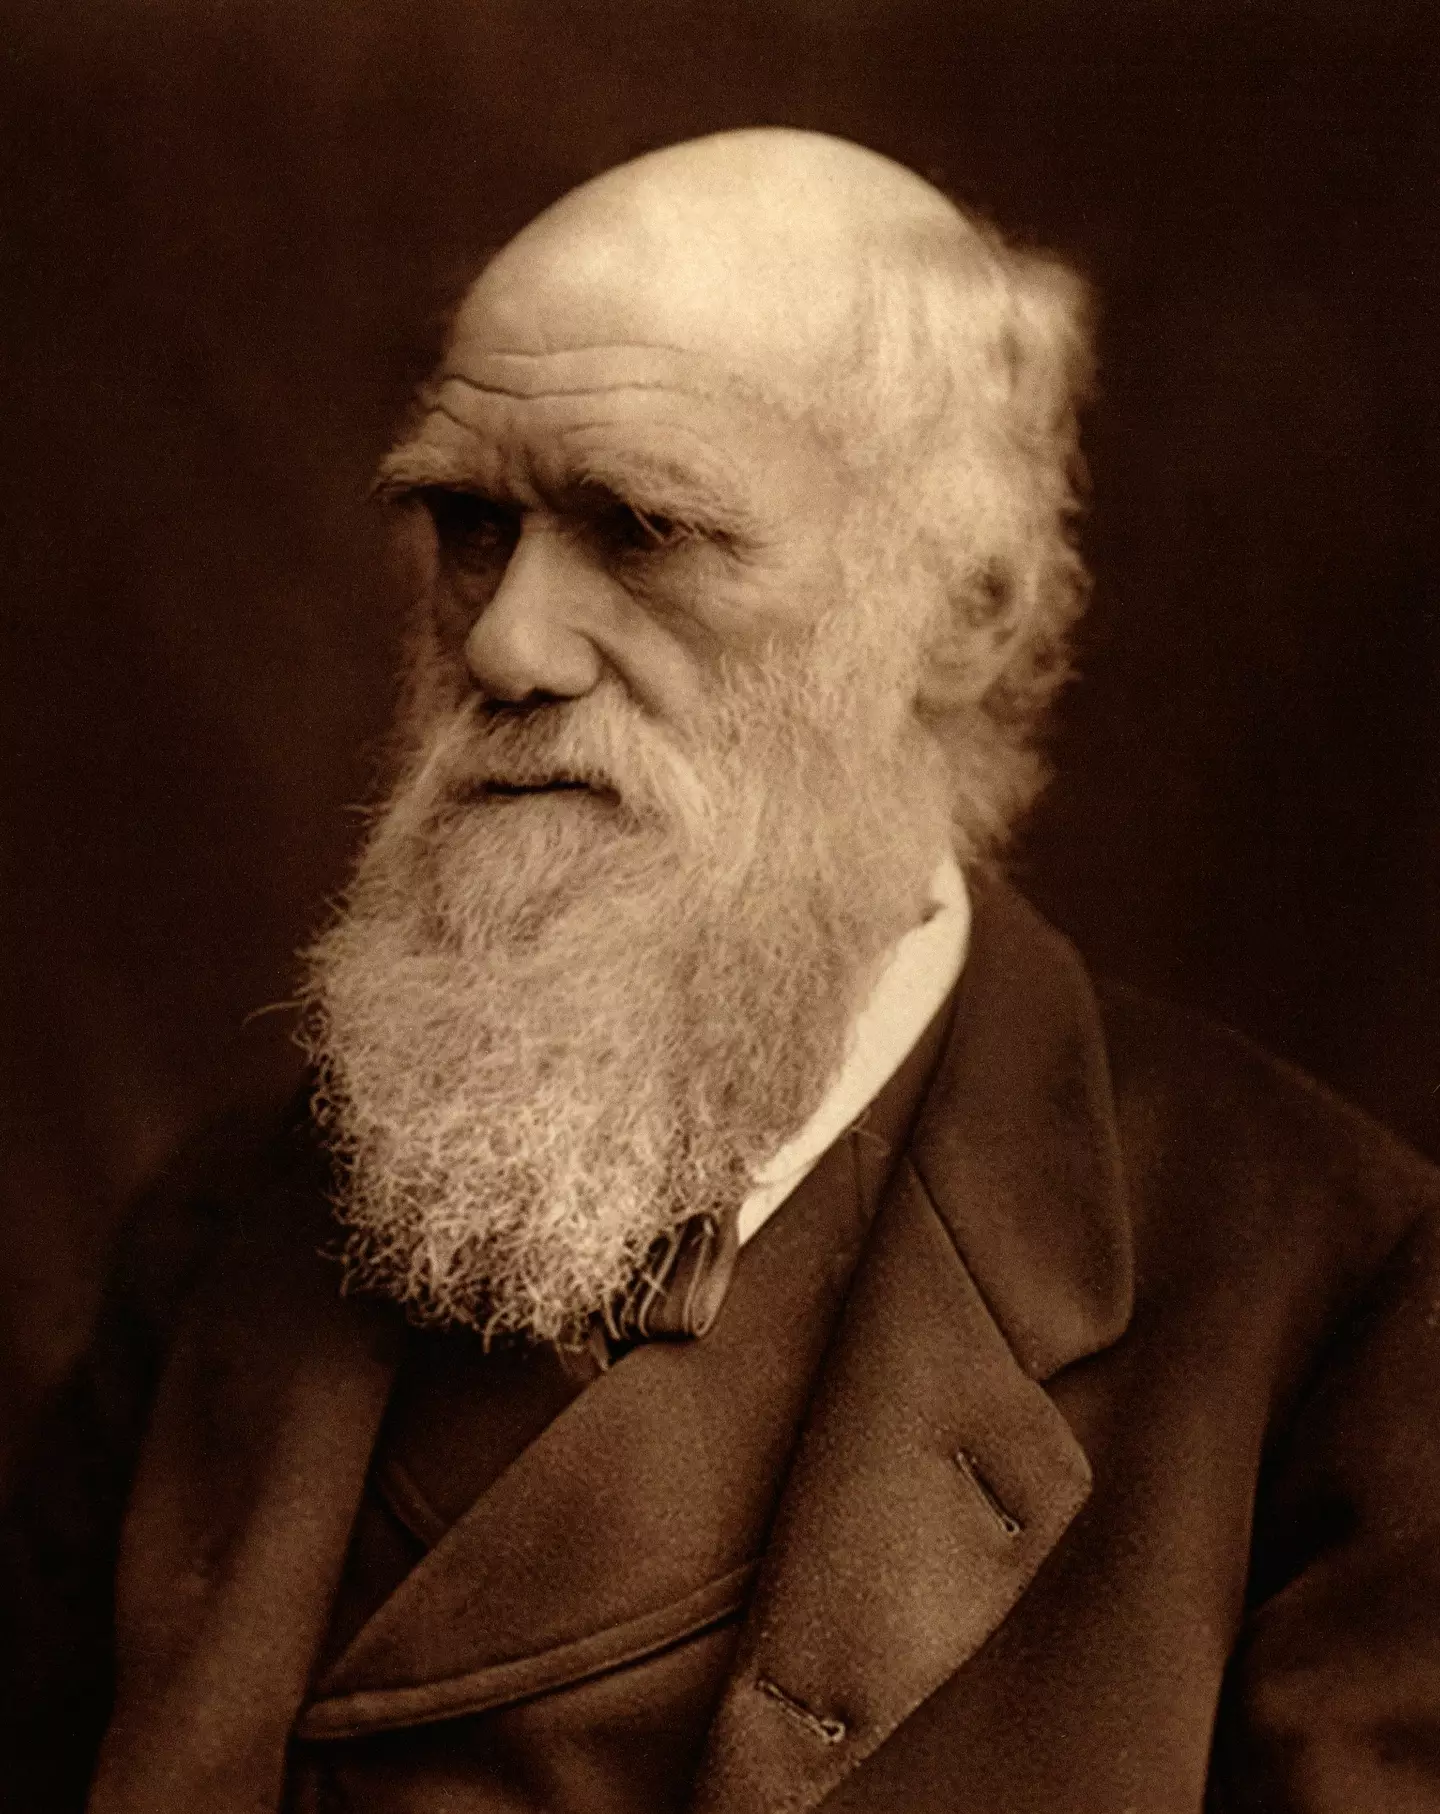 The theory builds on Darwin's Theory of Evolution.